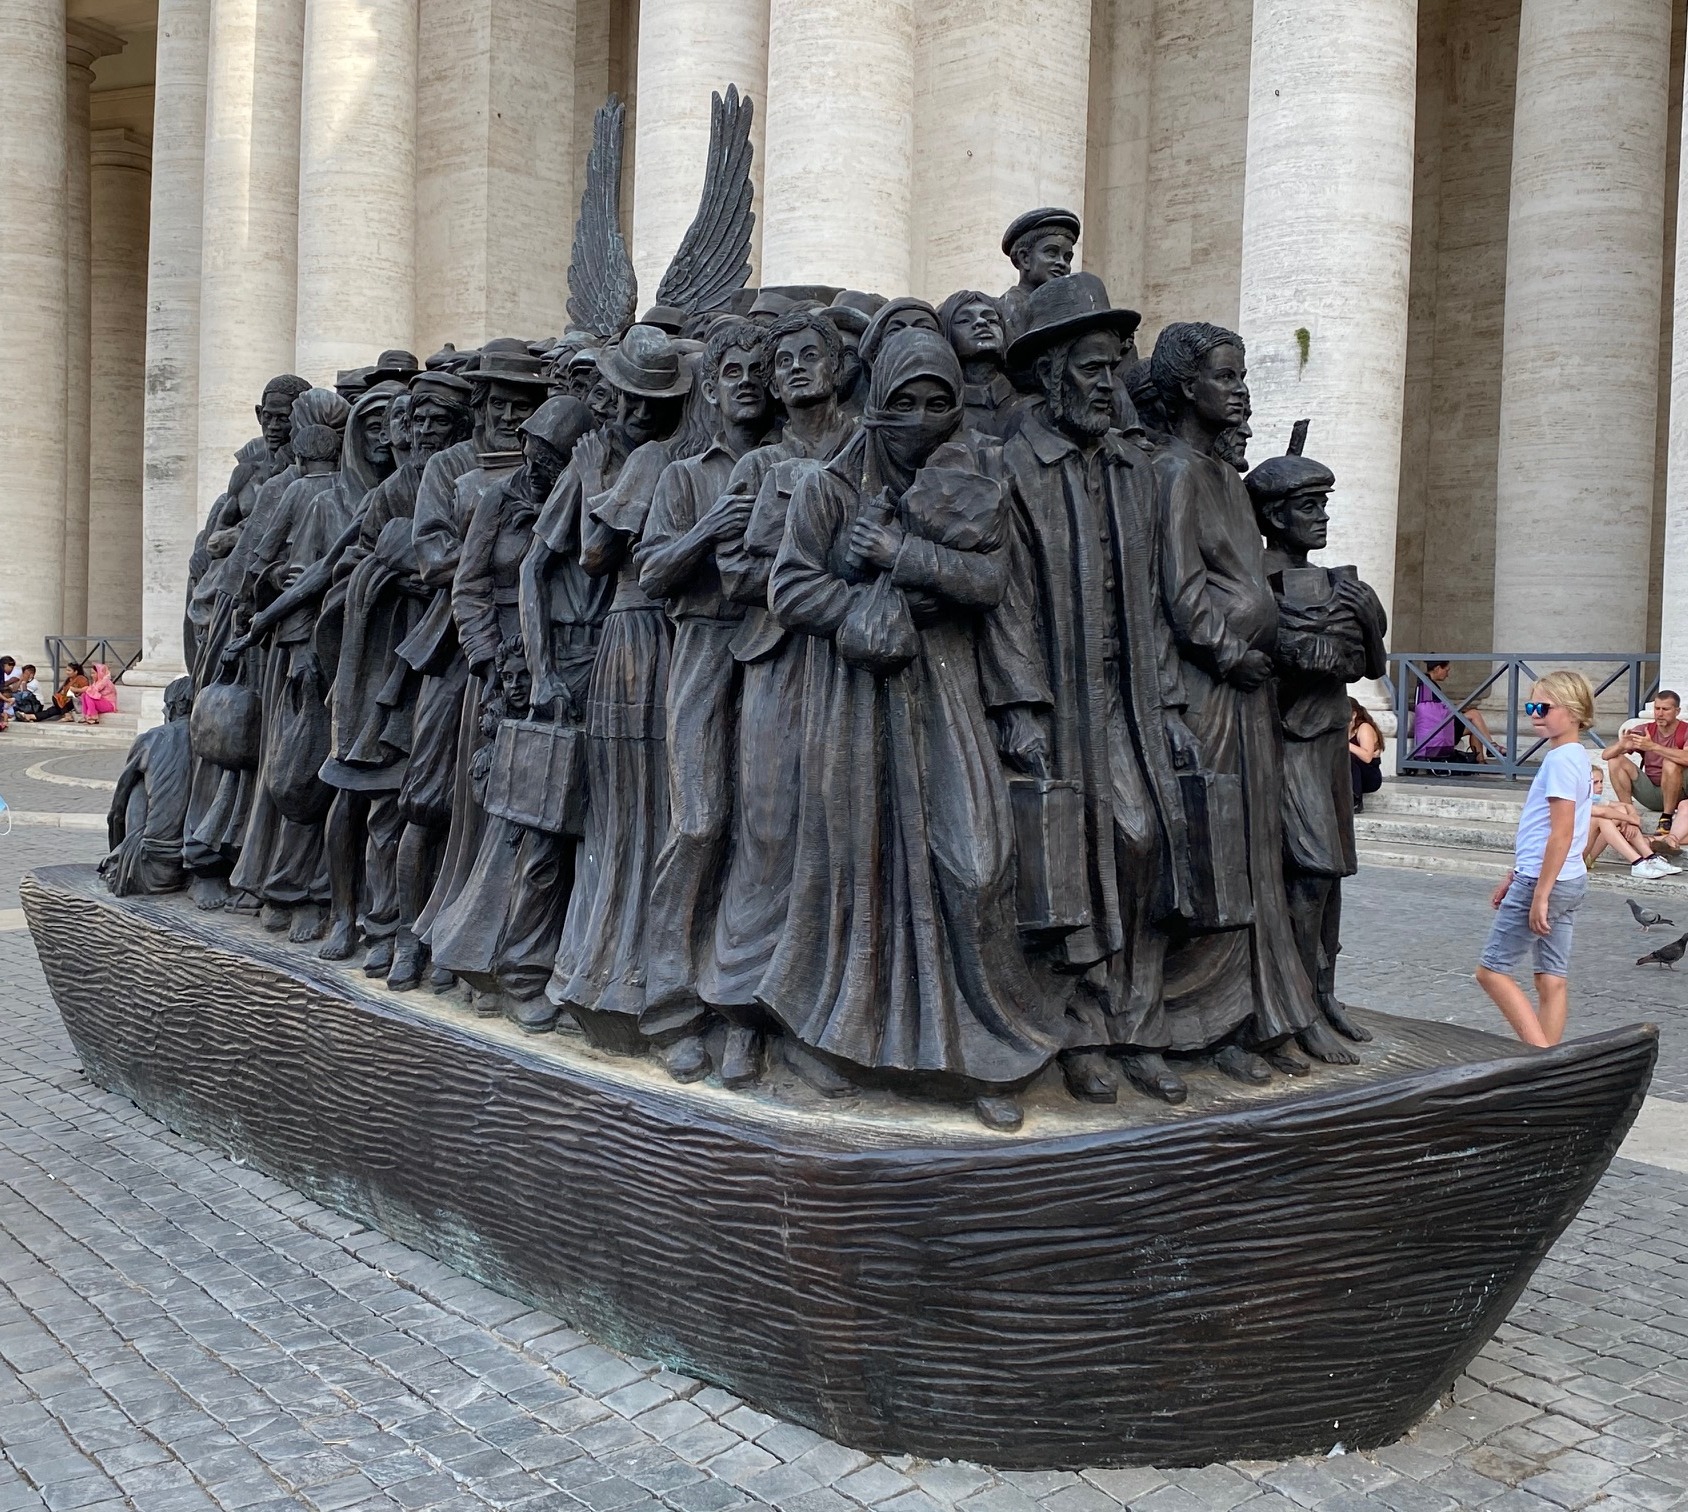 5 Things Every Art Tourist Should Know About Vatican Art